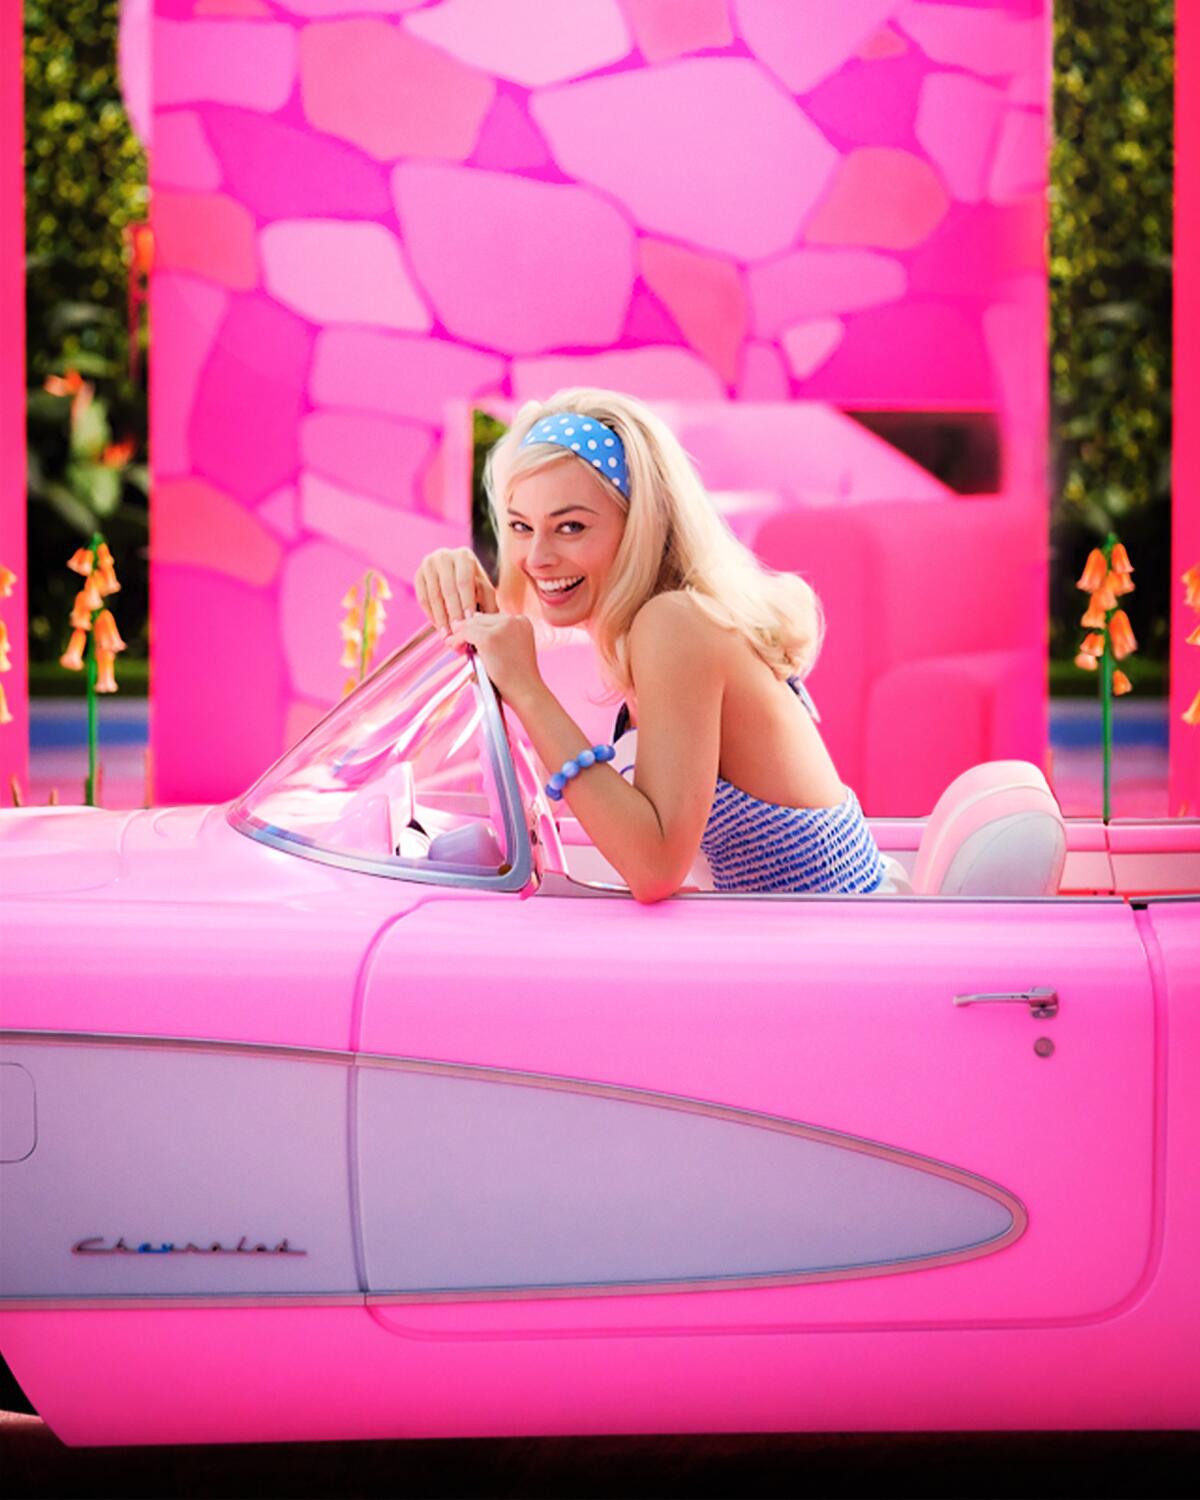 Margot Robbie with blonde hair in a blue outfit driving a pink convertible car